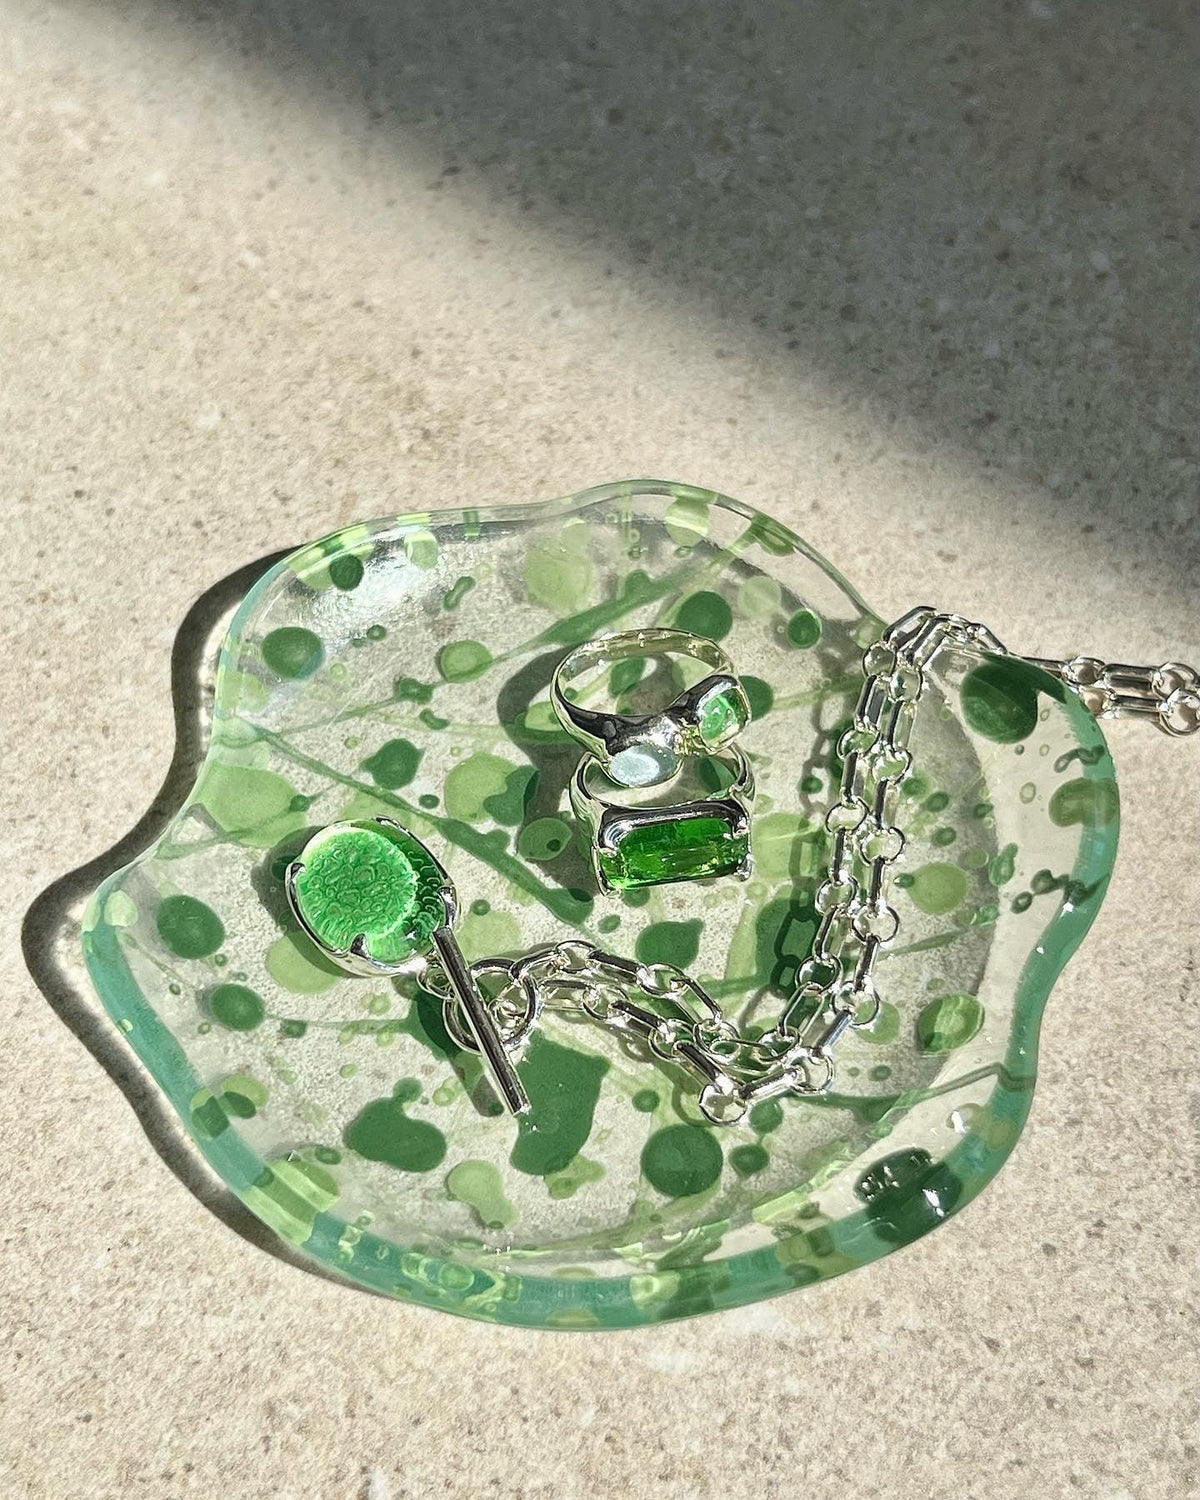 Splatter Glass Tray, Forest Green - CLED - At Present